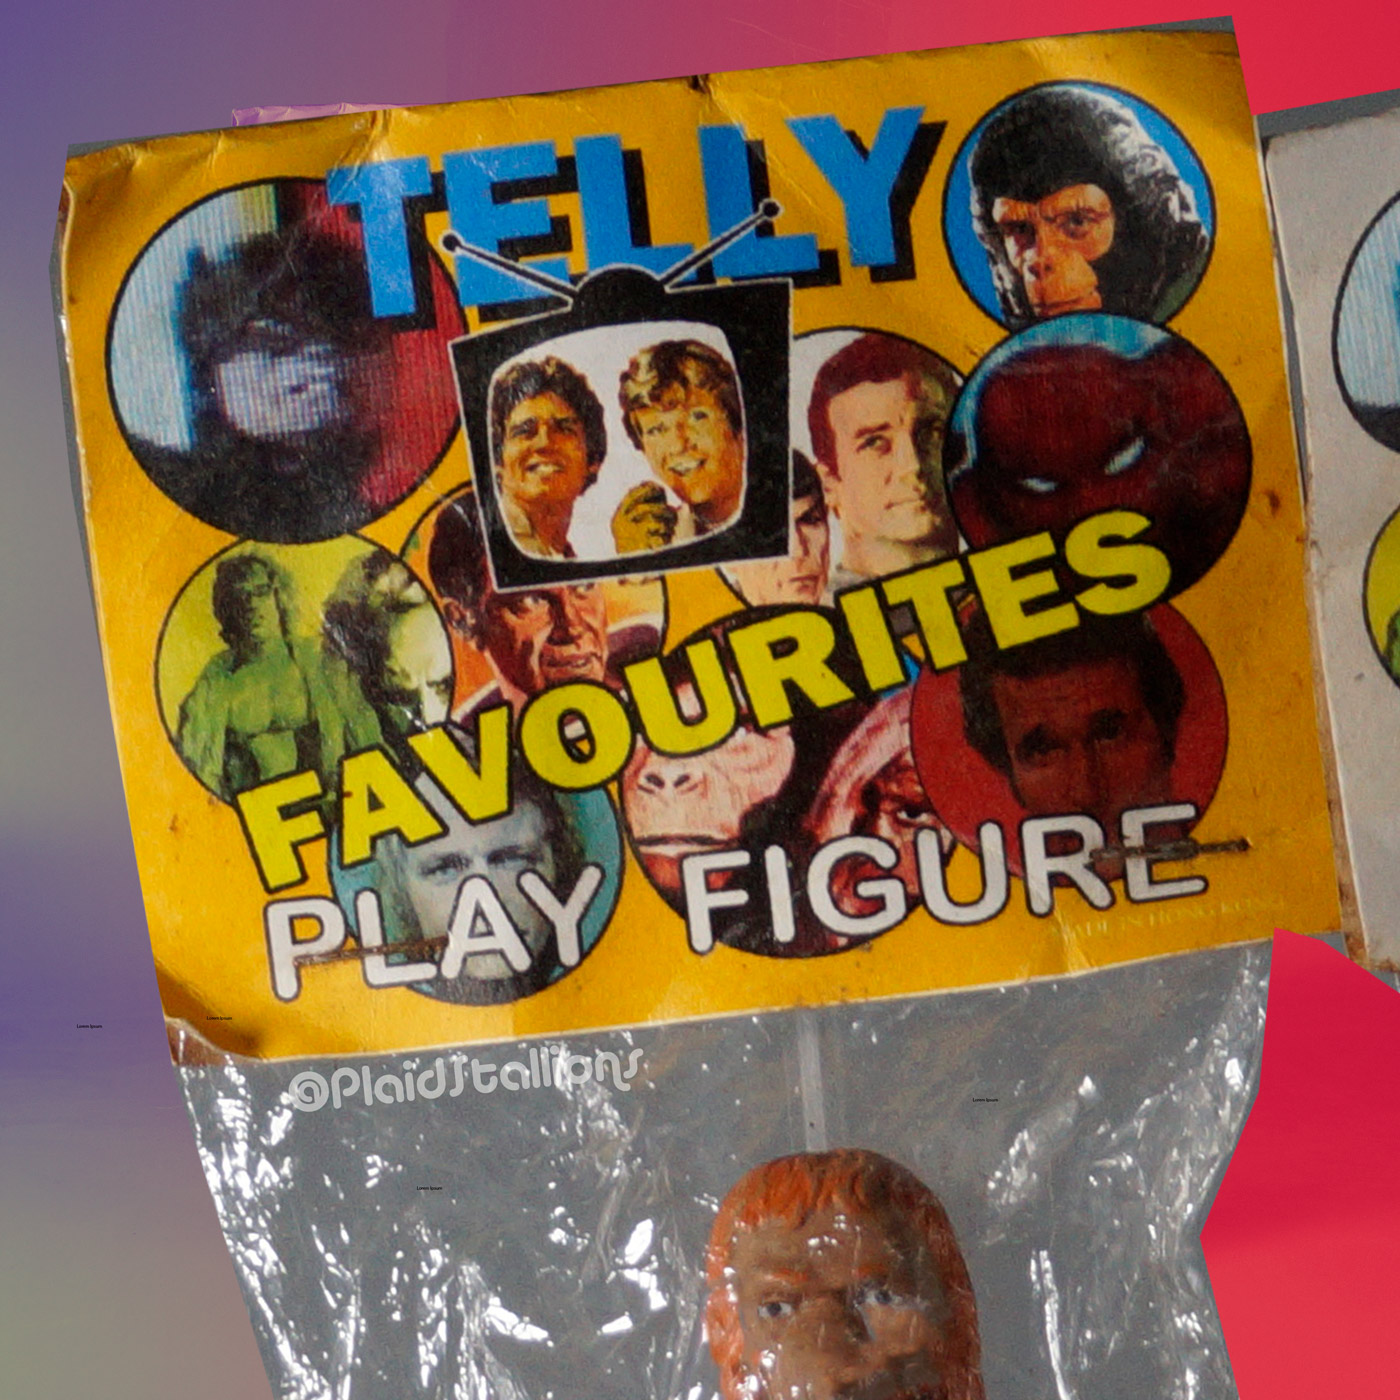 Telly Favourites Play Figures Megolike Planet of the Apes